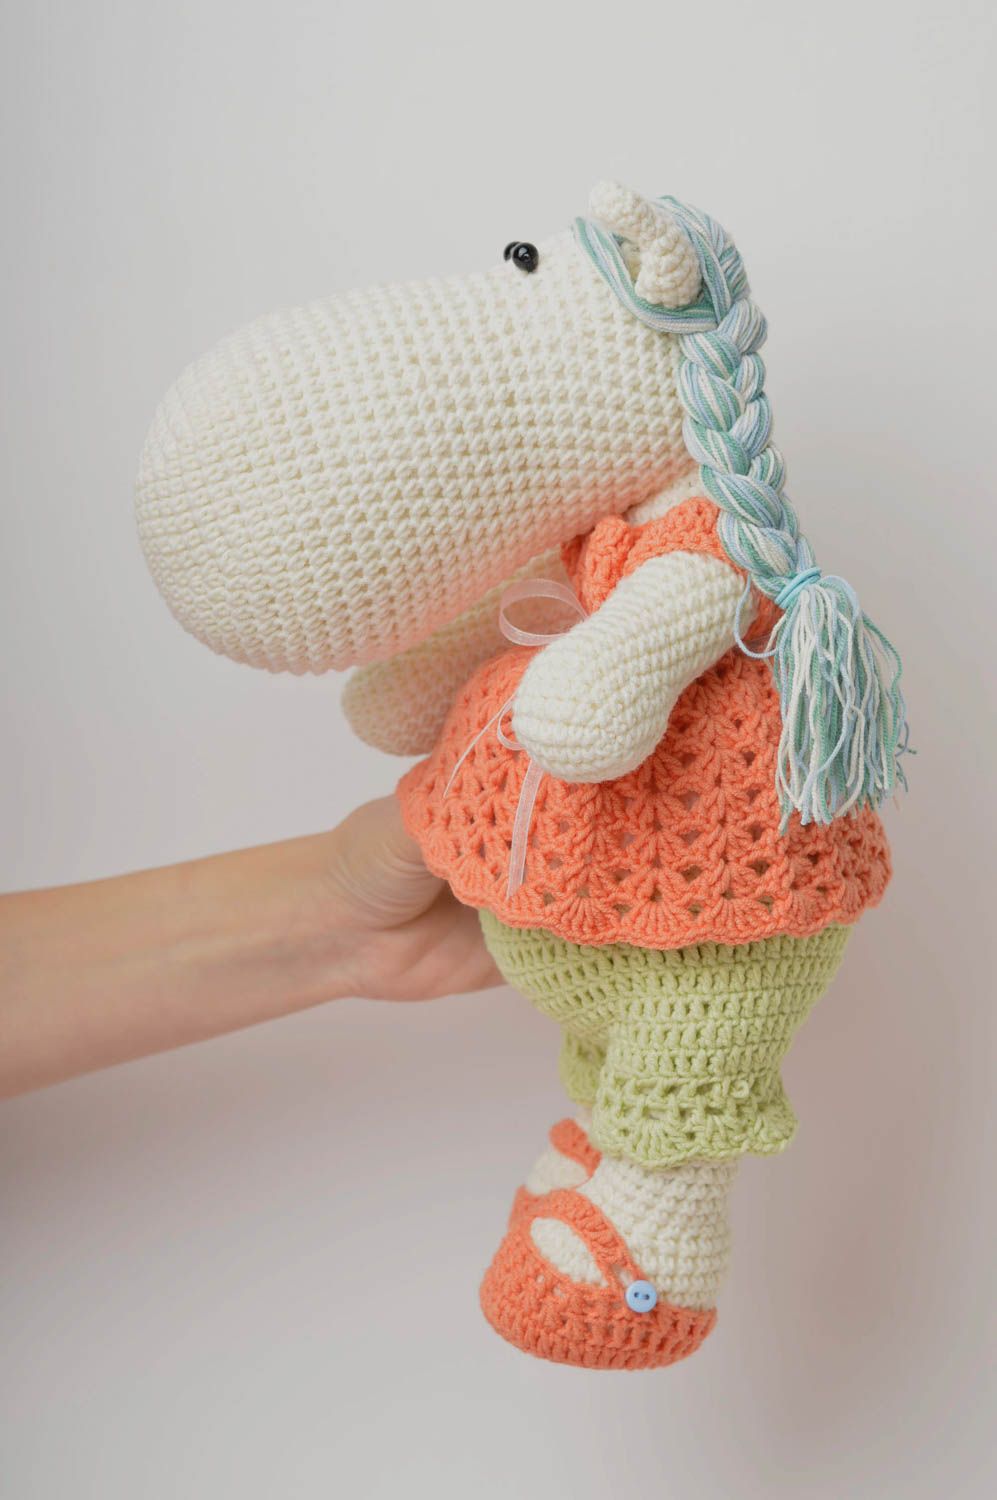 Handmade crochet toy unusual toys for kids decorative use only gift ideas photo 4